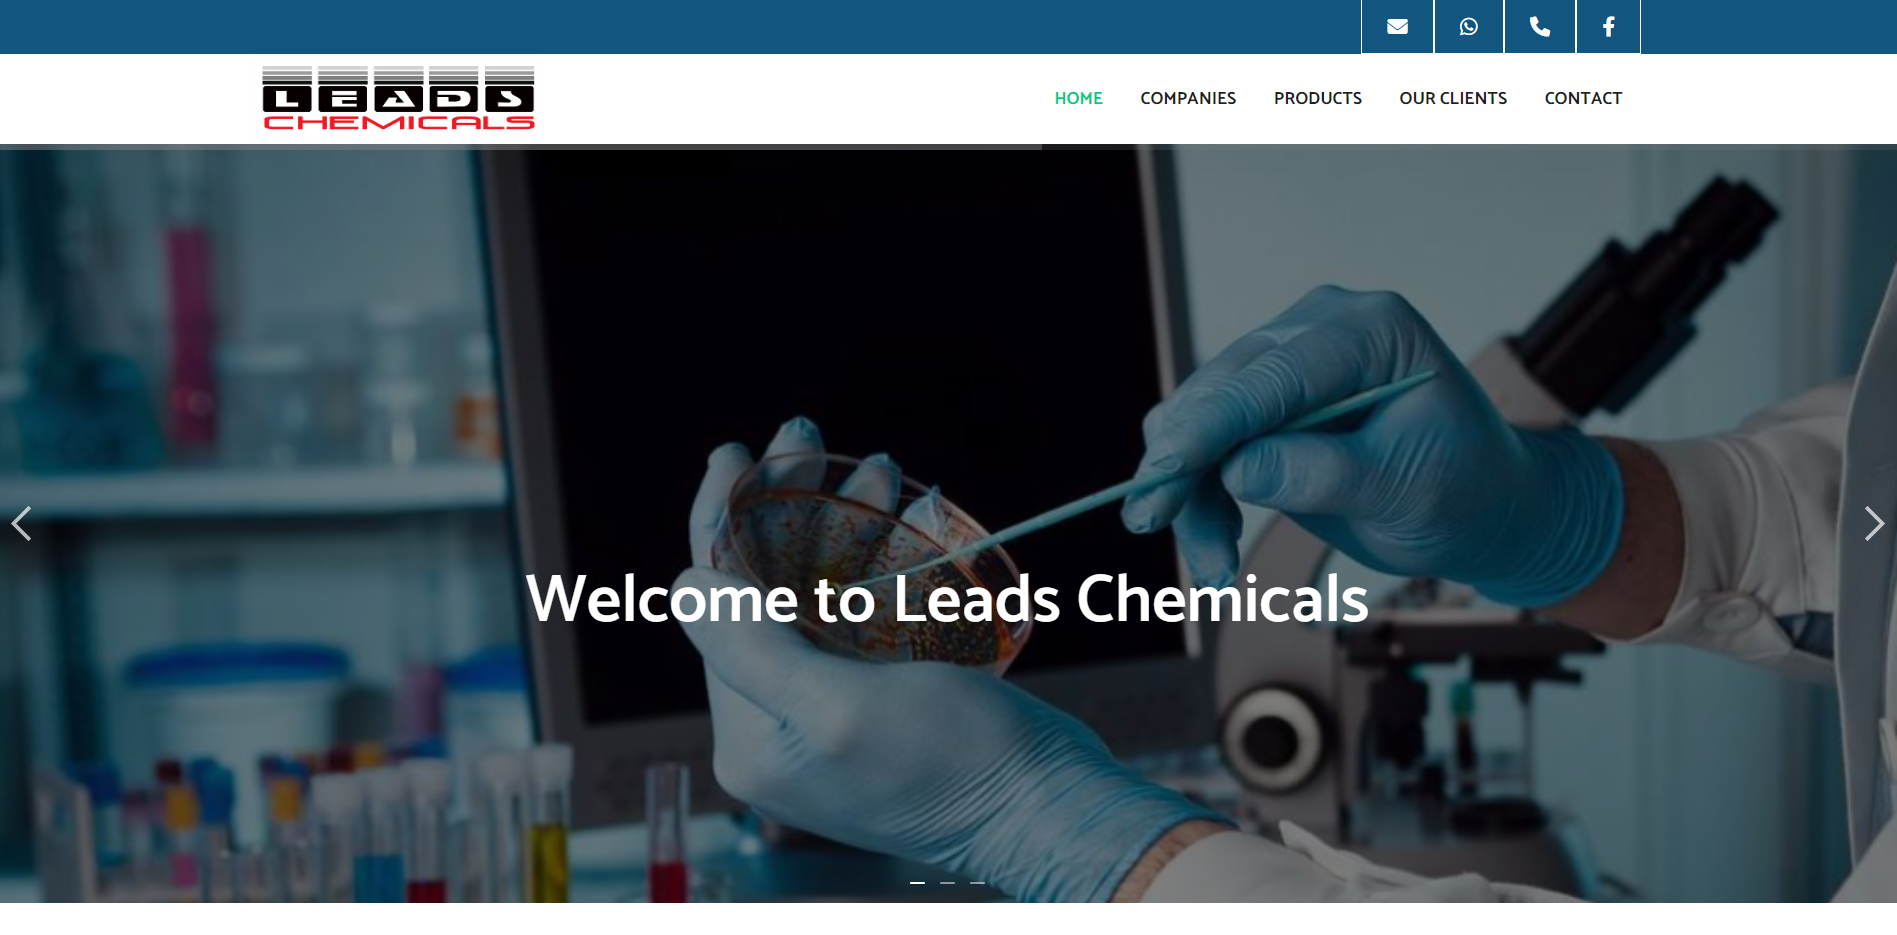 Leads Chemicals